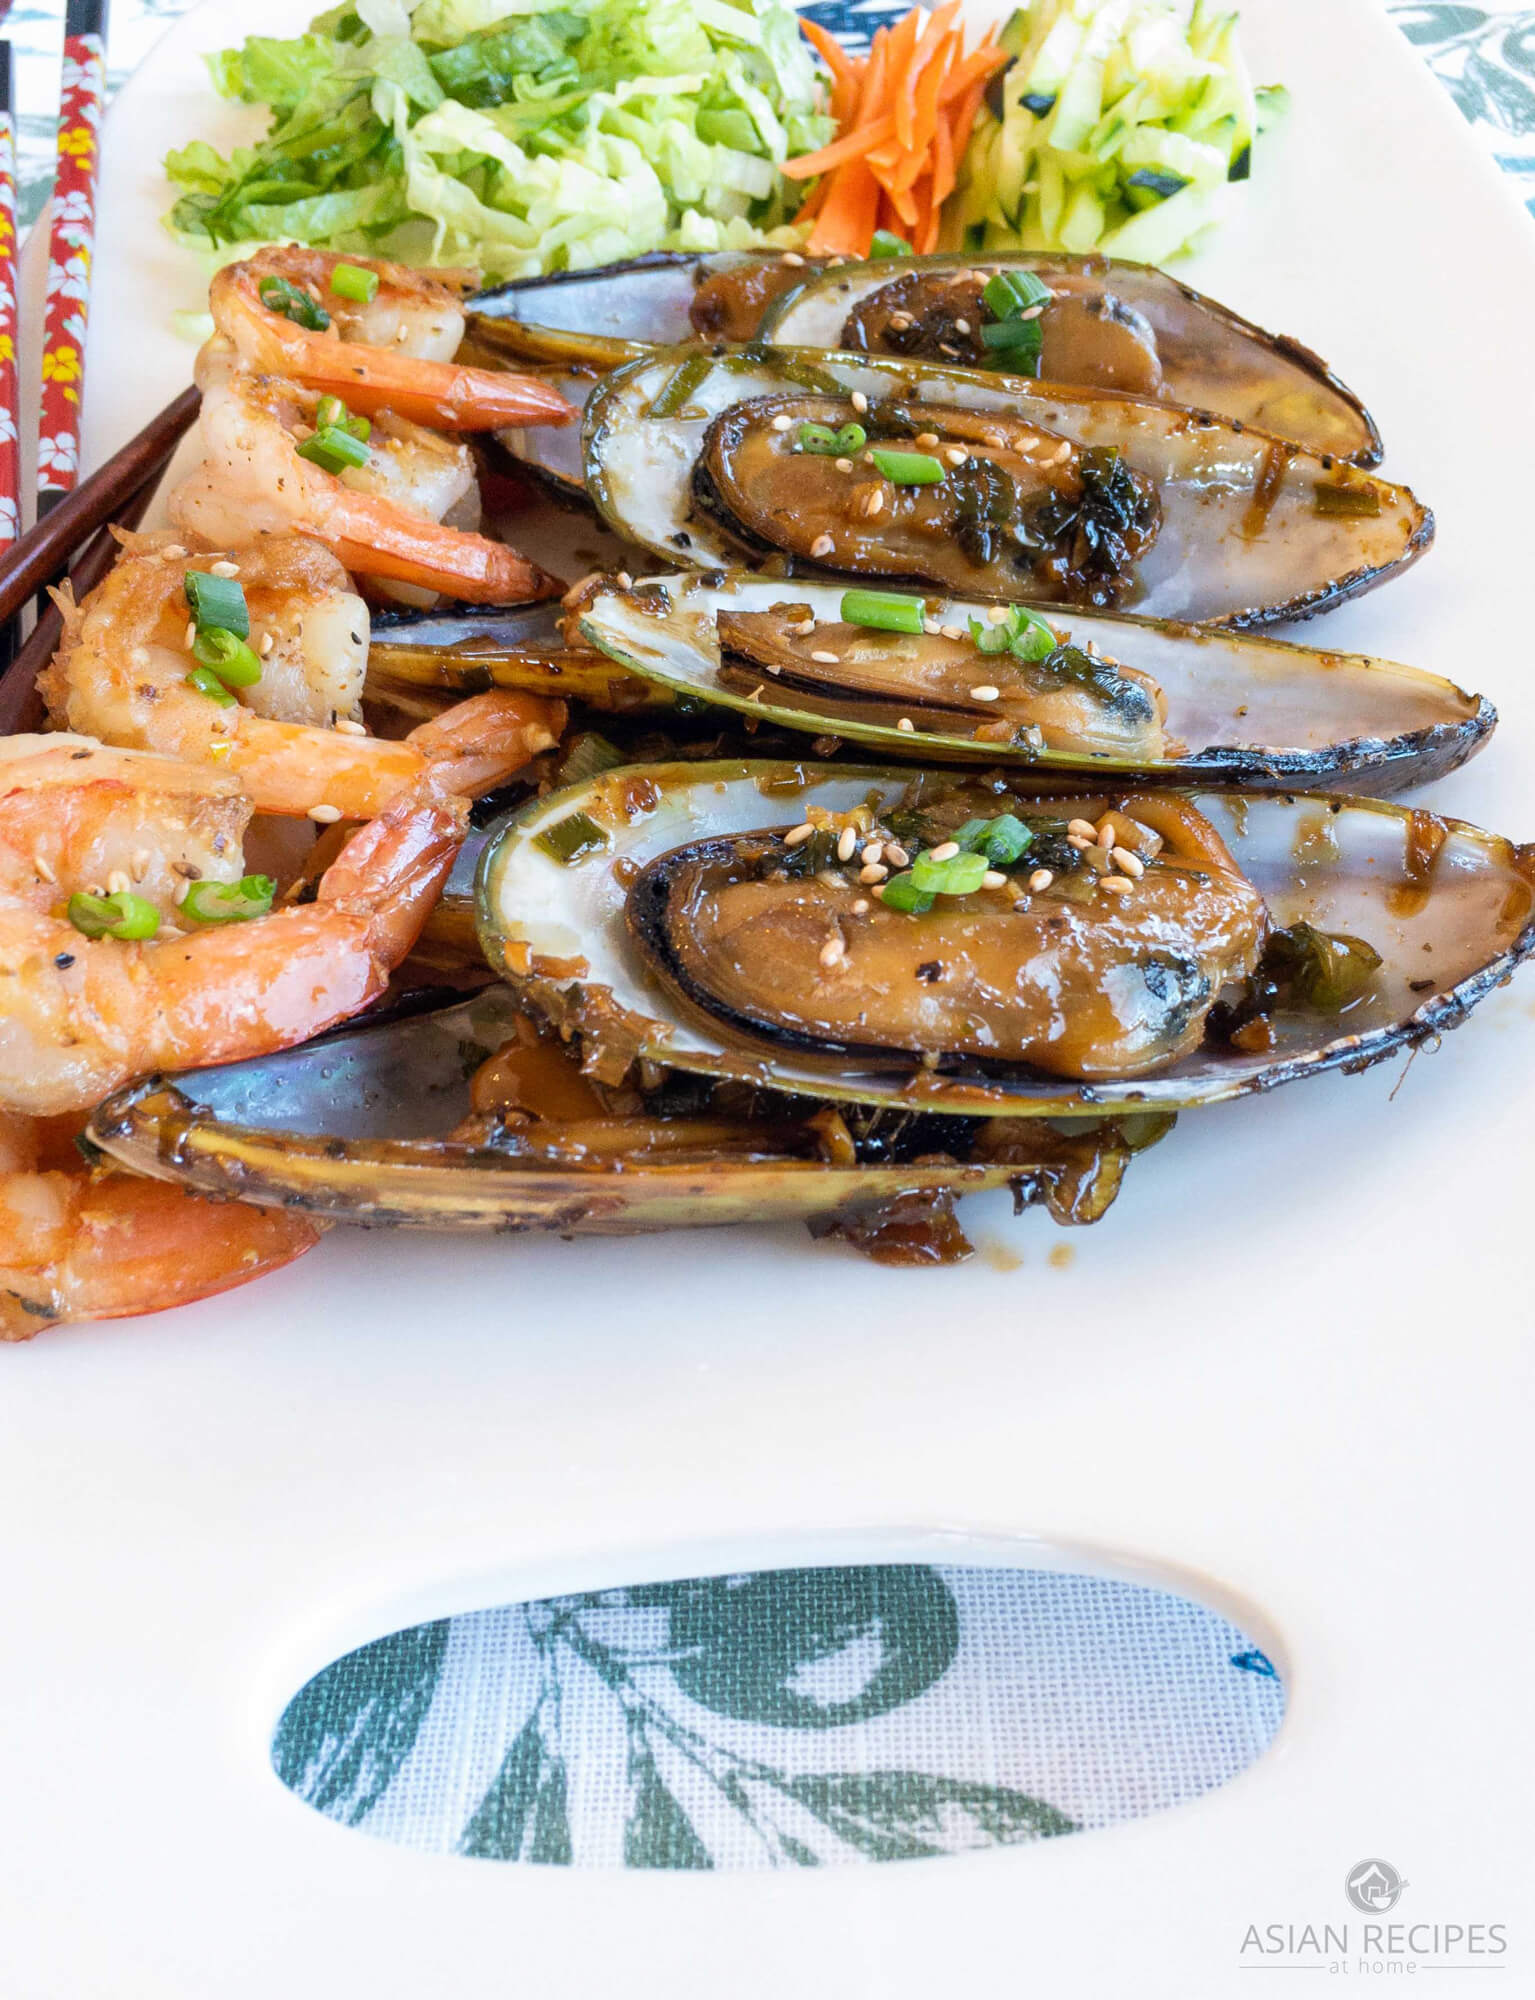 New Zealand Mussels on the half shell and shrimp are cooked in a garlic Asian sauce that is soy-free, gluten-free, Paleo and Whole30 compliant.